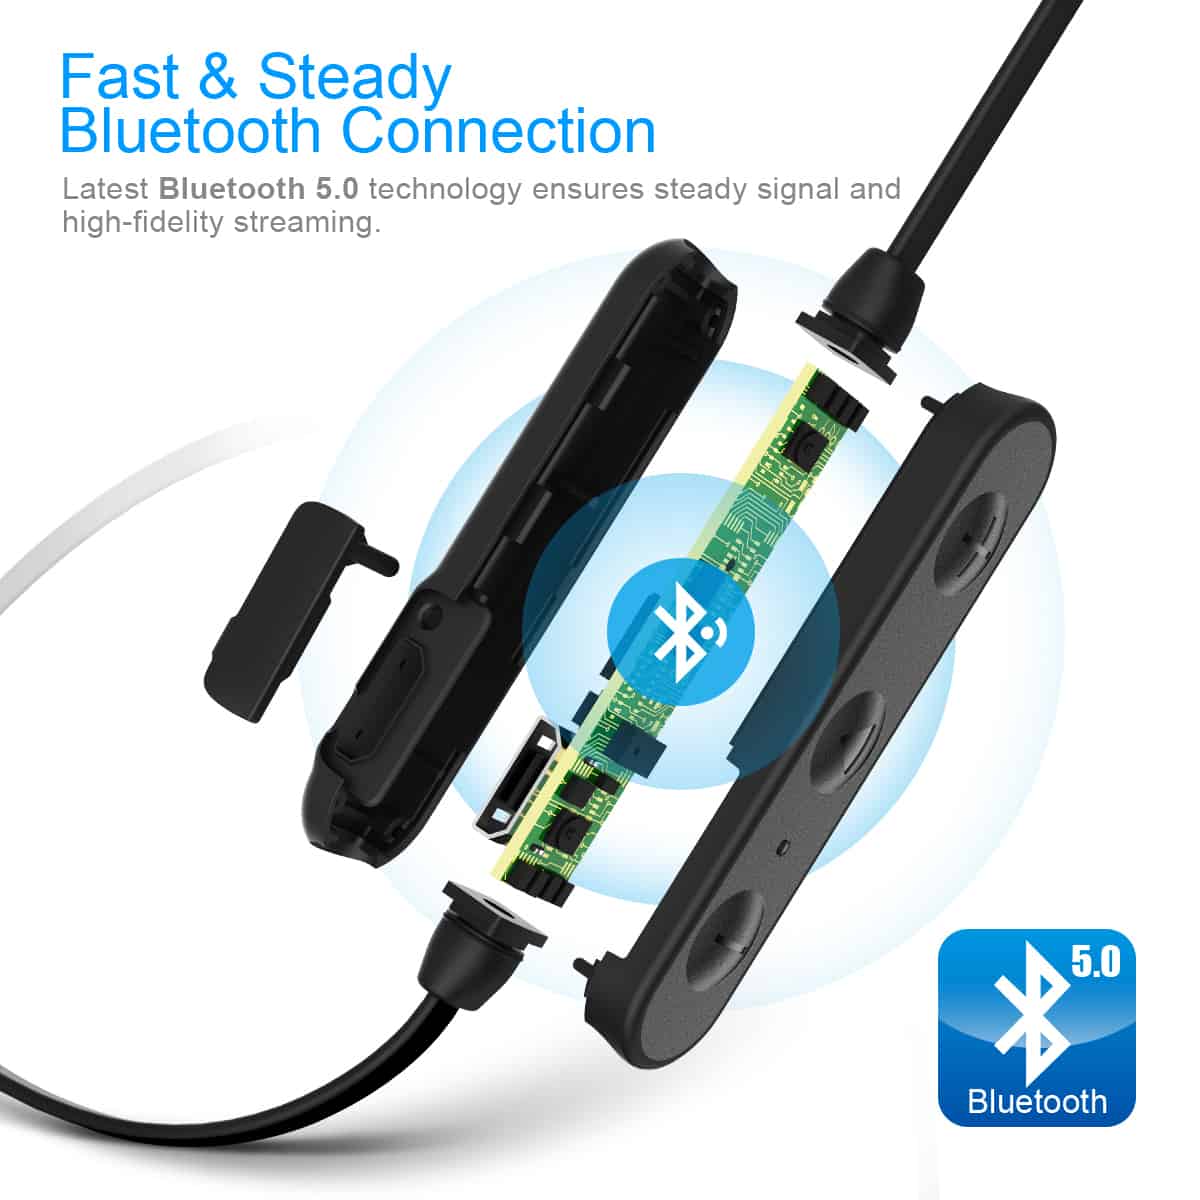 Iteknic ik-bh001 wireless stereo headset with up to 24 hrs playback launching december 28